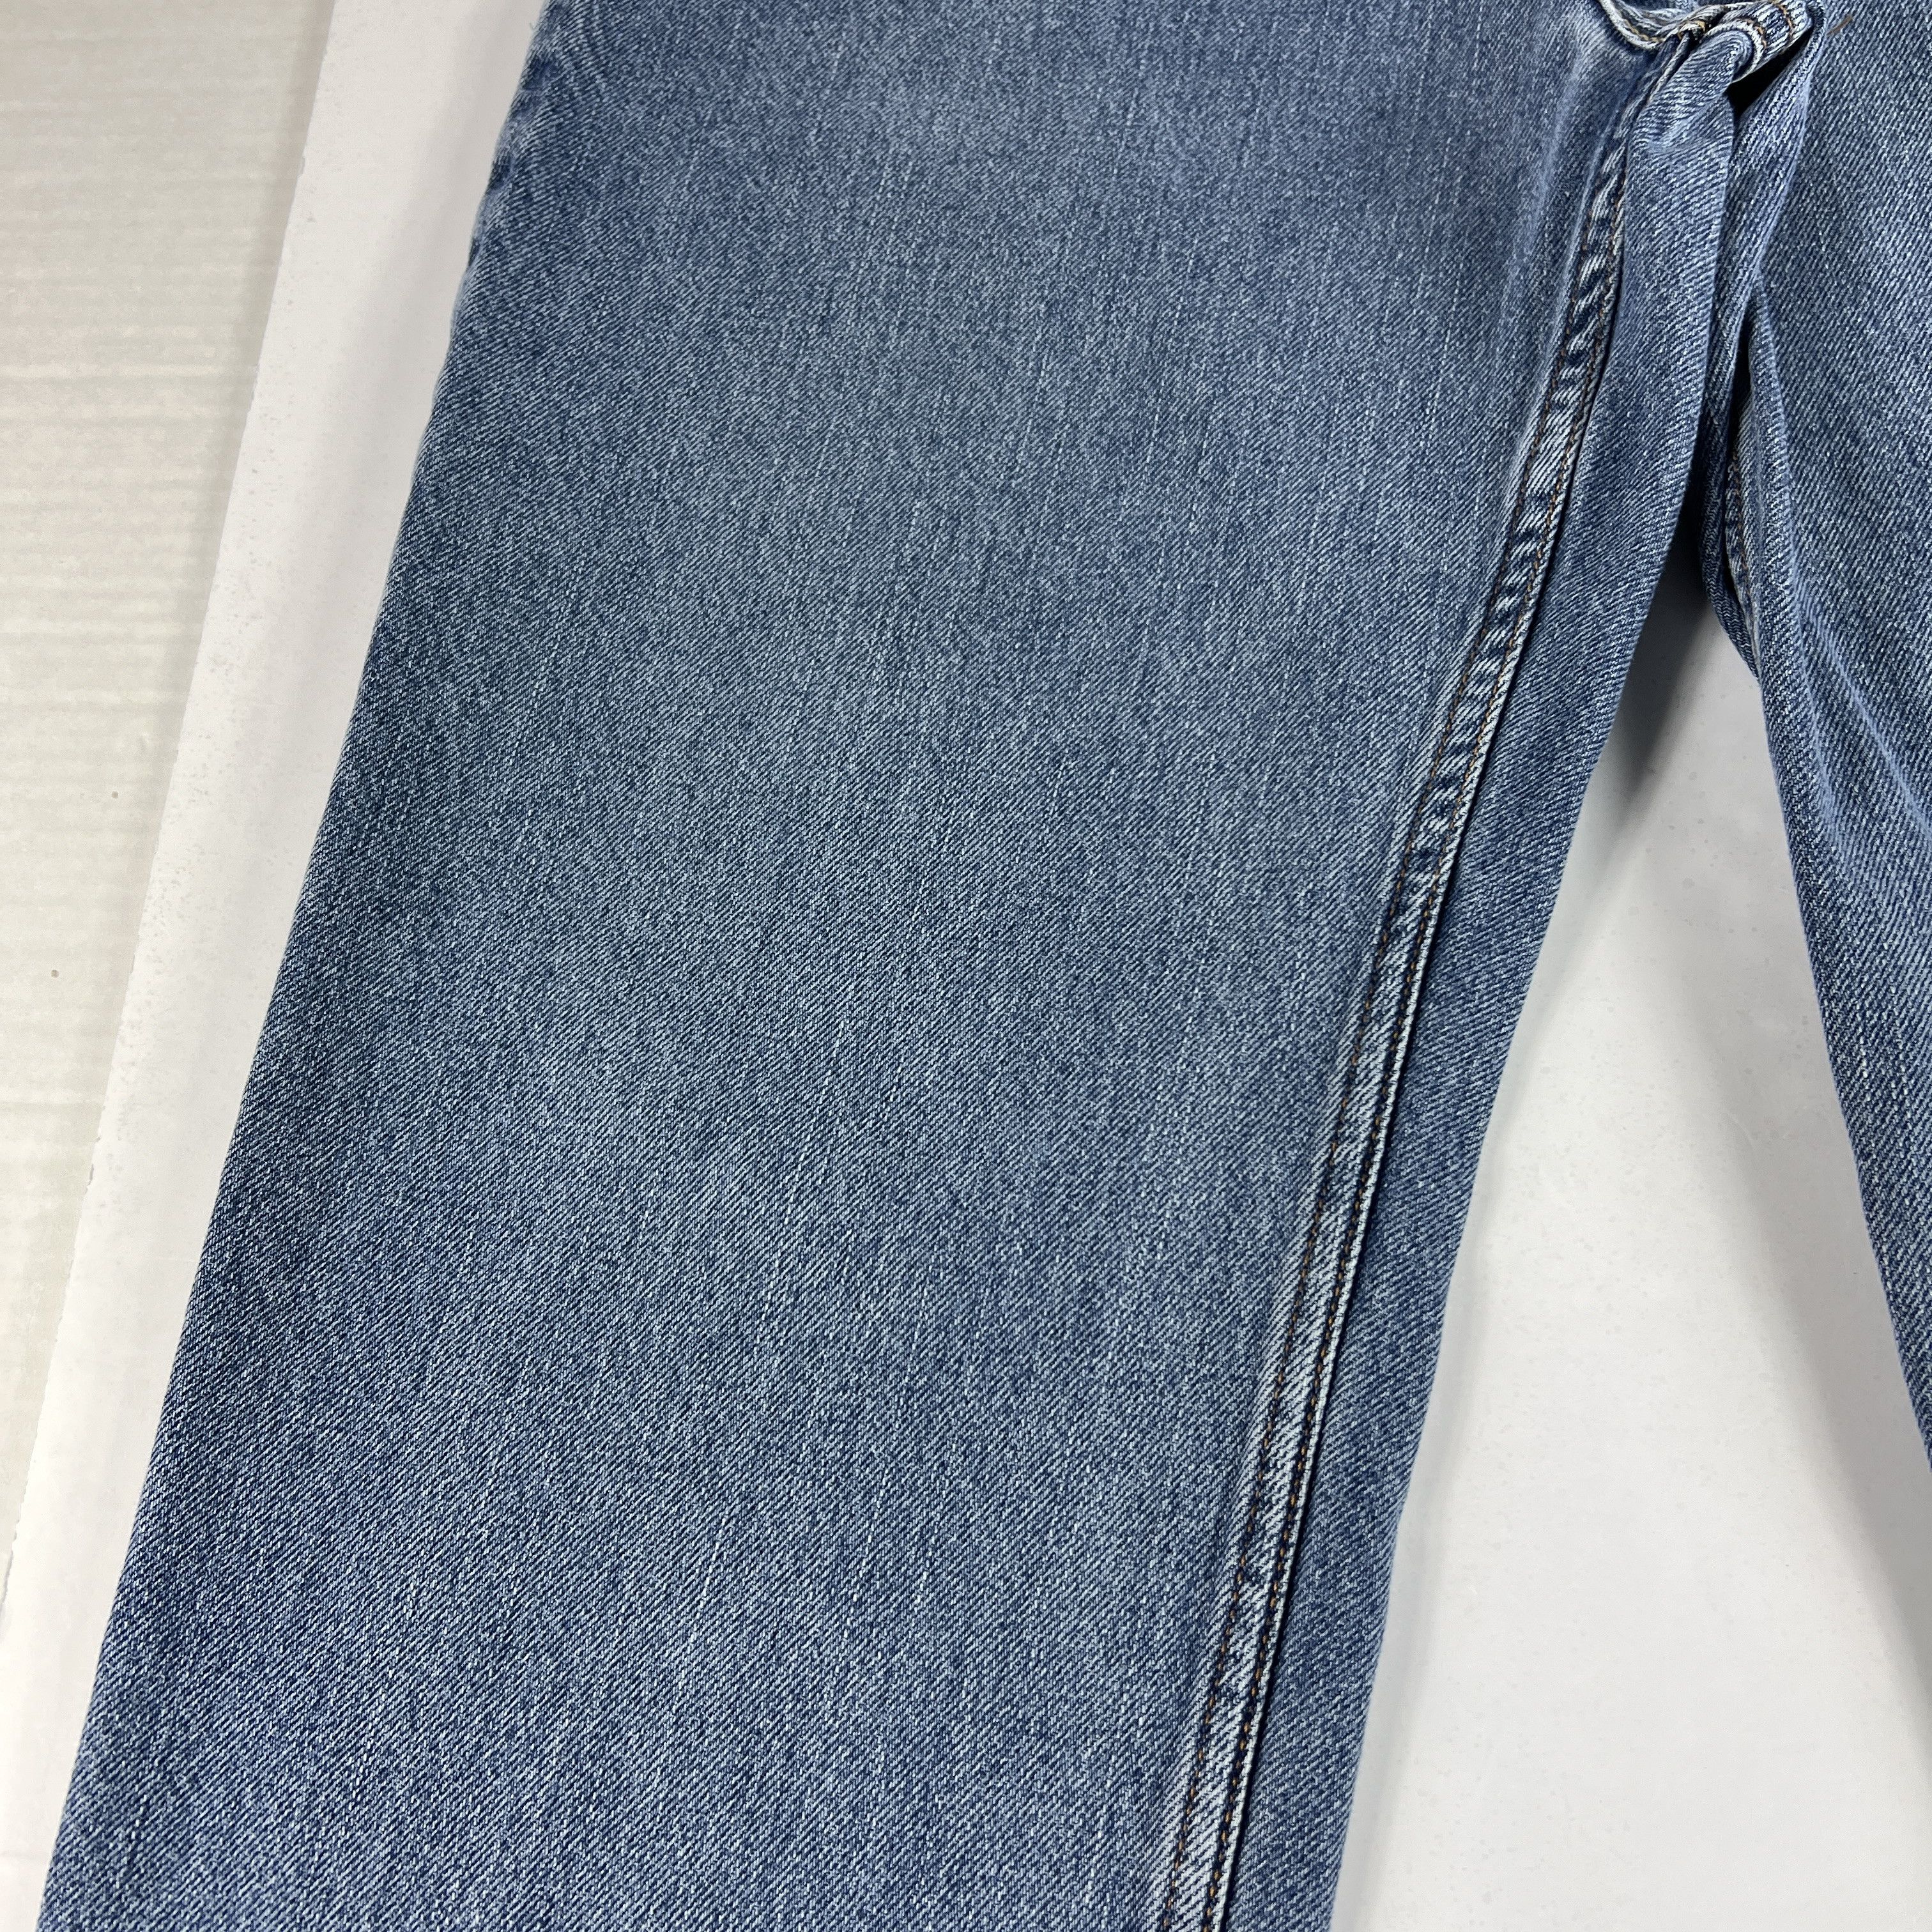 Levi's Y2K Levi's Jean 550 Relaxed Straight Blue Faded Cotton Denim Size US 34 / EU 50 - 4 Thumbnail